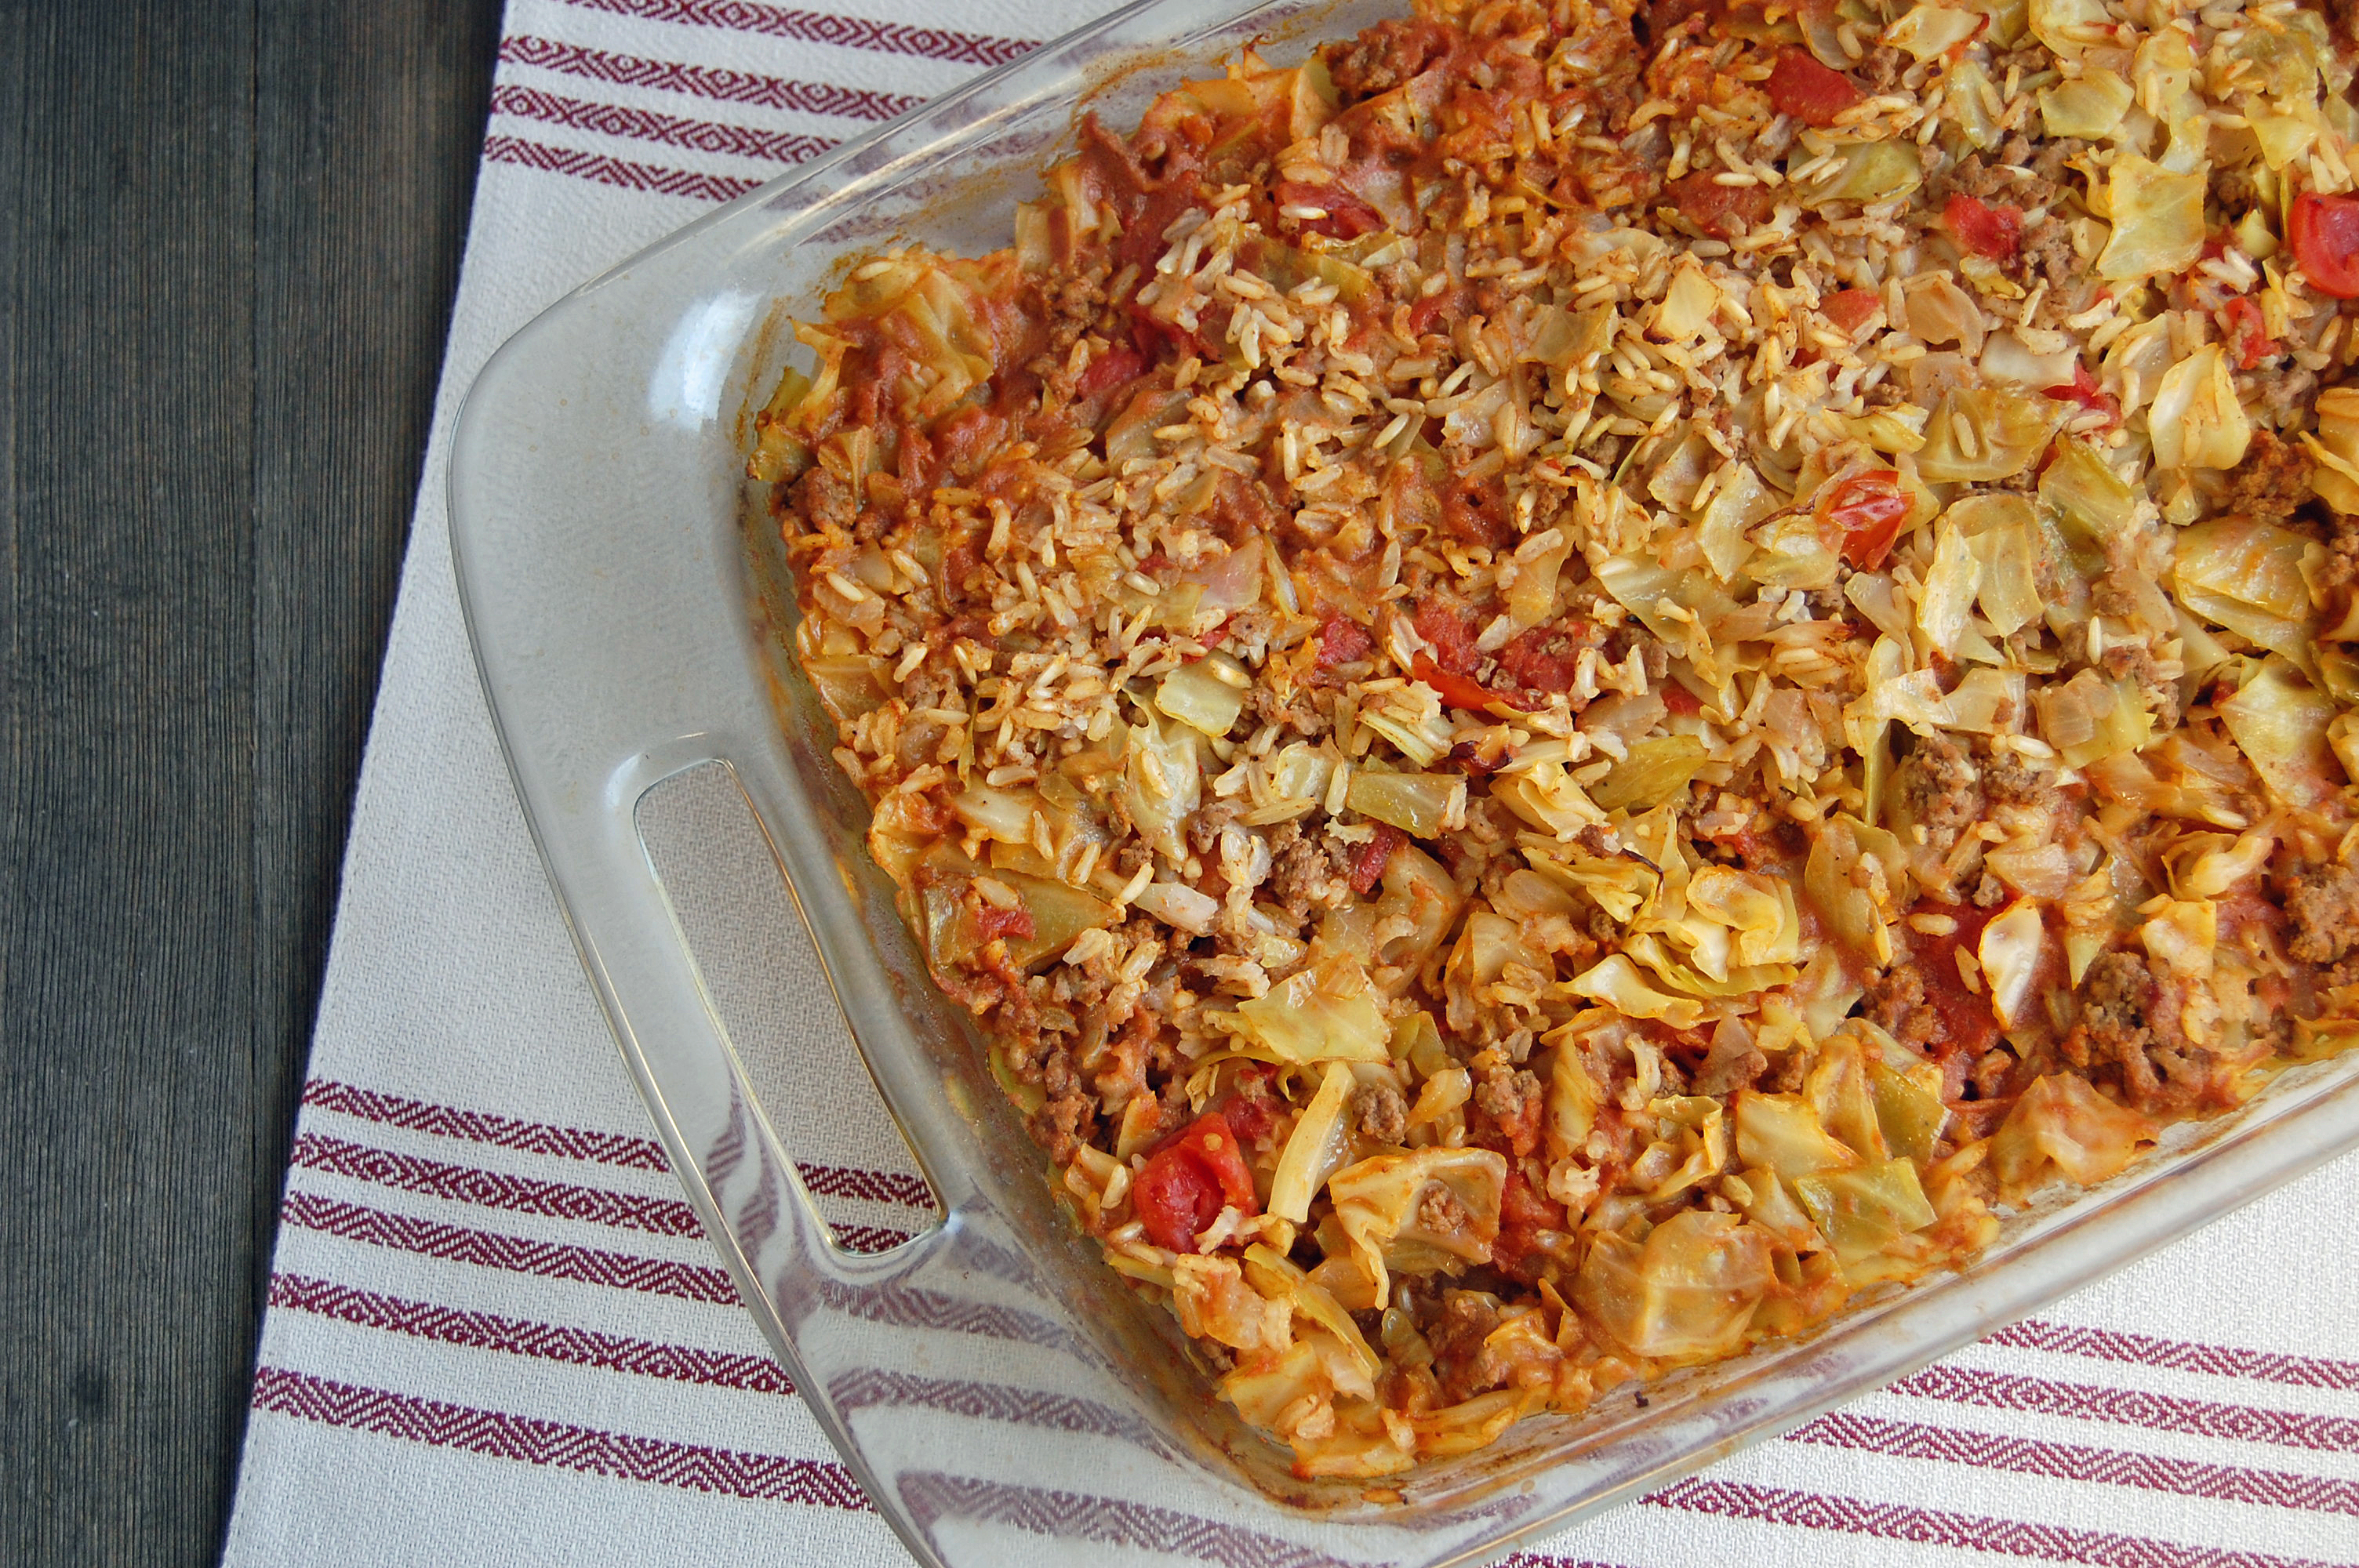 This unstuffed cabbage casserole is tasty and nutritious. (NDSU photo)